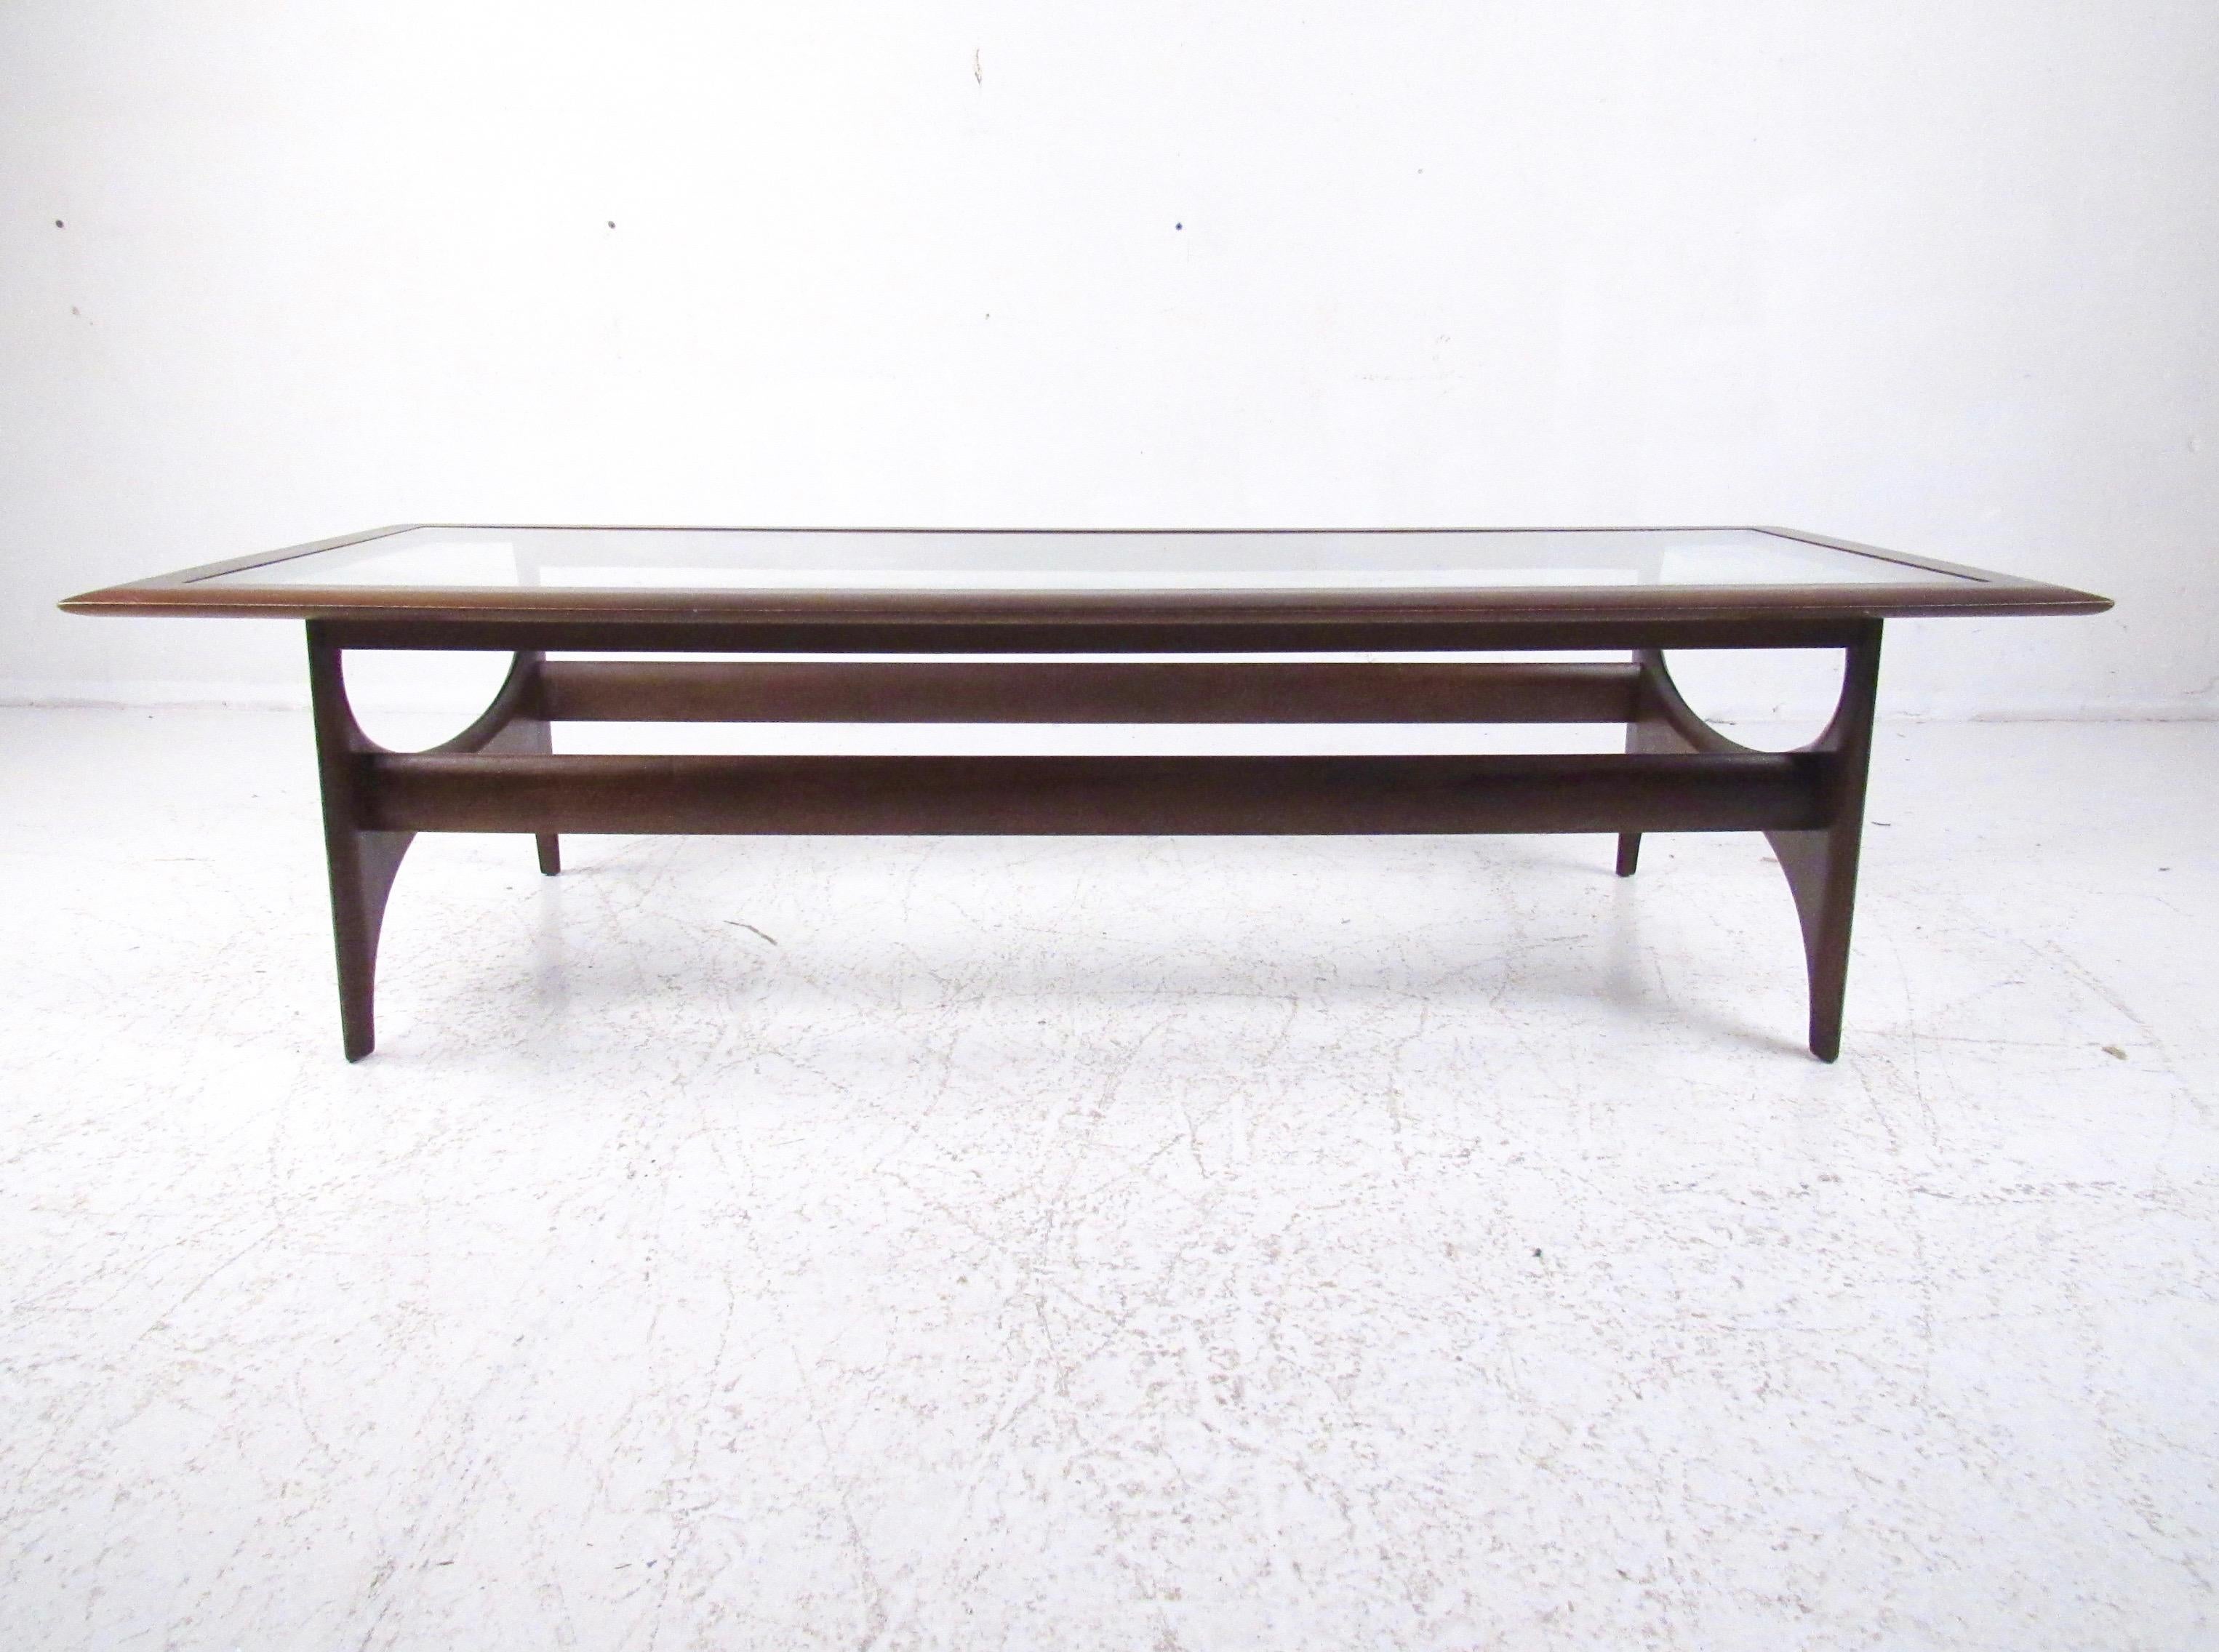 This striking walnut finish coffee table features a glass top and stylish Mid-Century Modern design. Simple yet unique design by Lane Furniture makes an impressive centre table for home or business seating arrangement. Please confirm item location